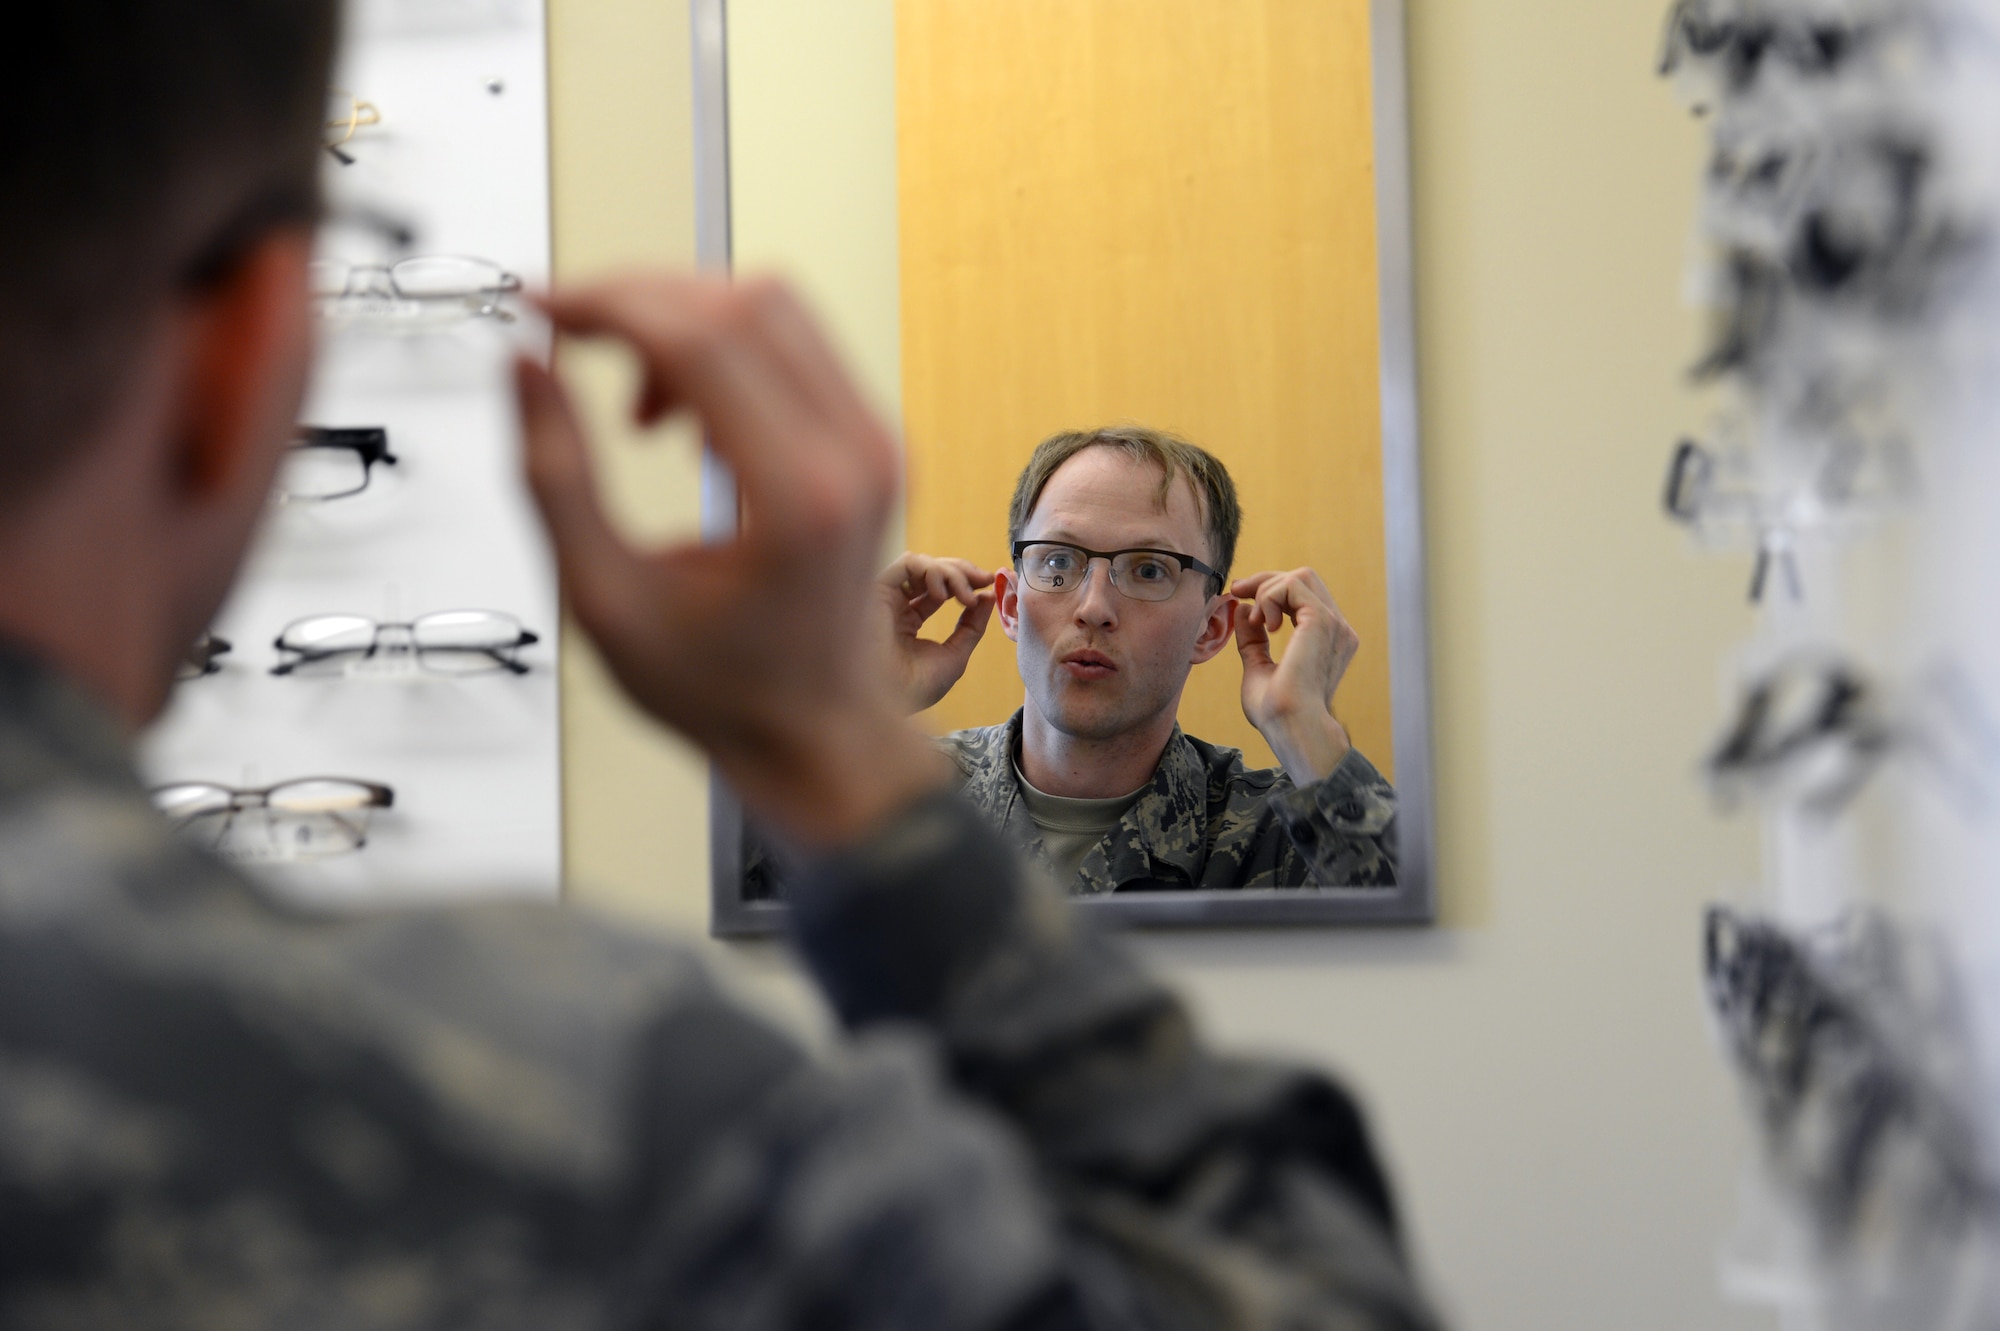 Staff Sgt. William Behl, 62nd Maintenances Squadron crewchief, looks at different eye glasses May 9, 2017, at Joint Base Lewis-McChord, Wash. The McChord Field optometry clinic provides military-issue spectacles and gas mask inserts, which include a frame of choice. (U.S. Air Force photo/Senior Airman Jacob Jimenez) 